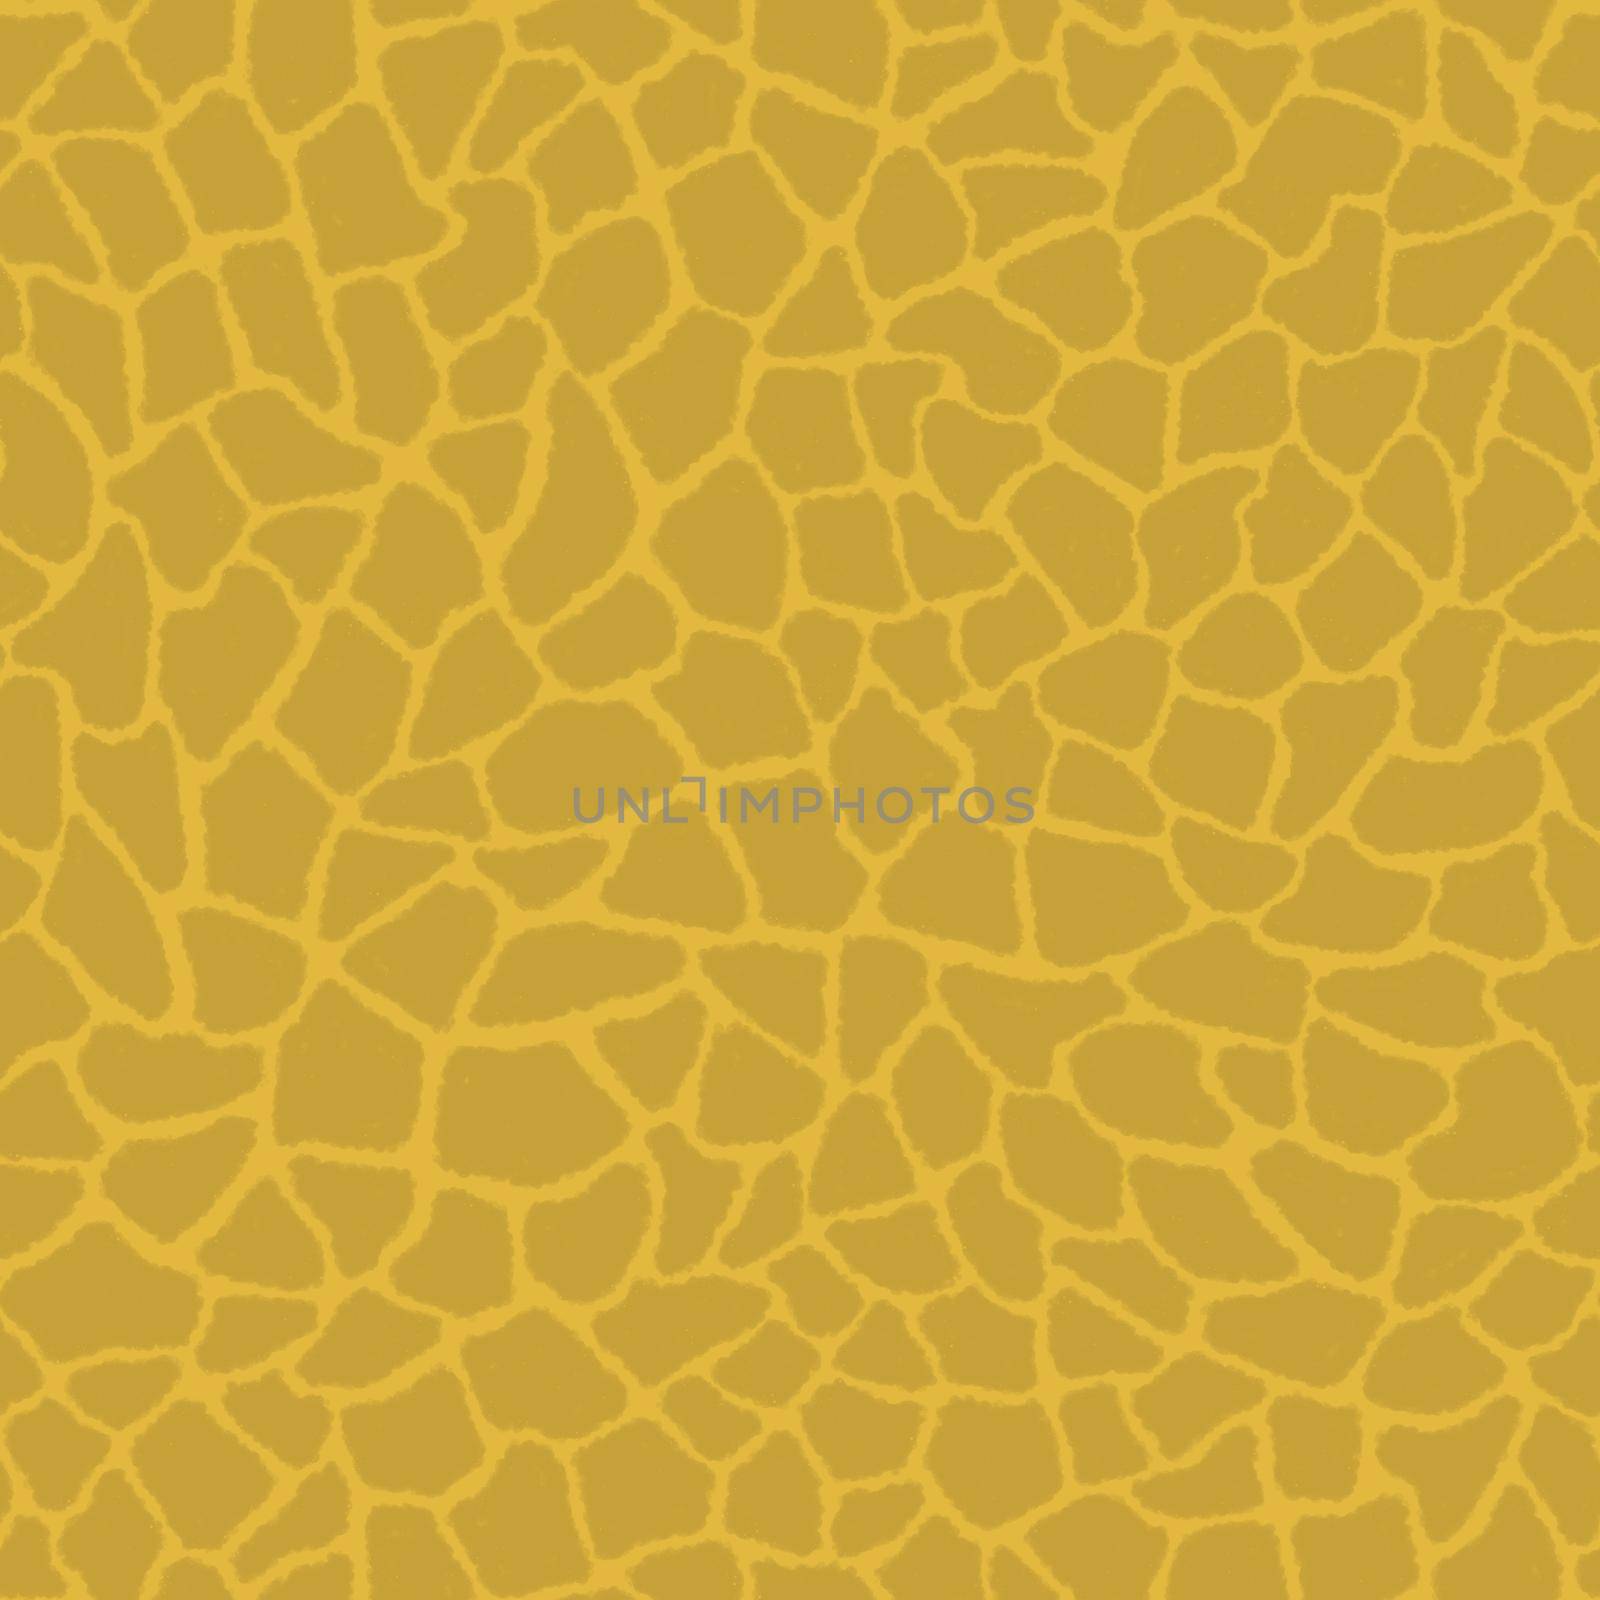 Giraffe skin color seamless pattern with fashion animal print for continuous replicate. Chaotic mosaic gray pieces on mustard background. Wrapping paper, funny textile fabric print,design,decor.